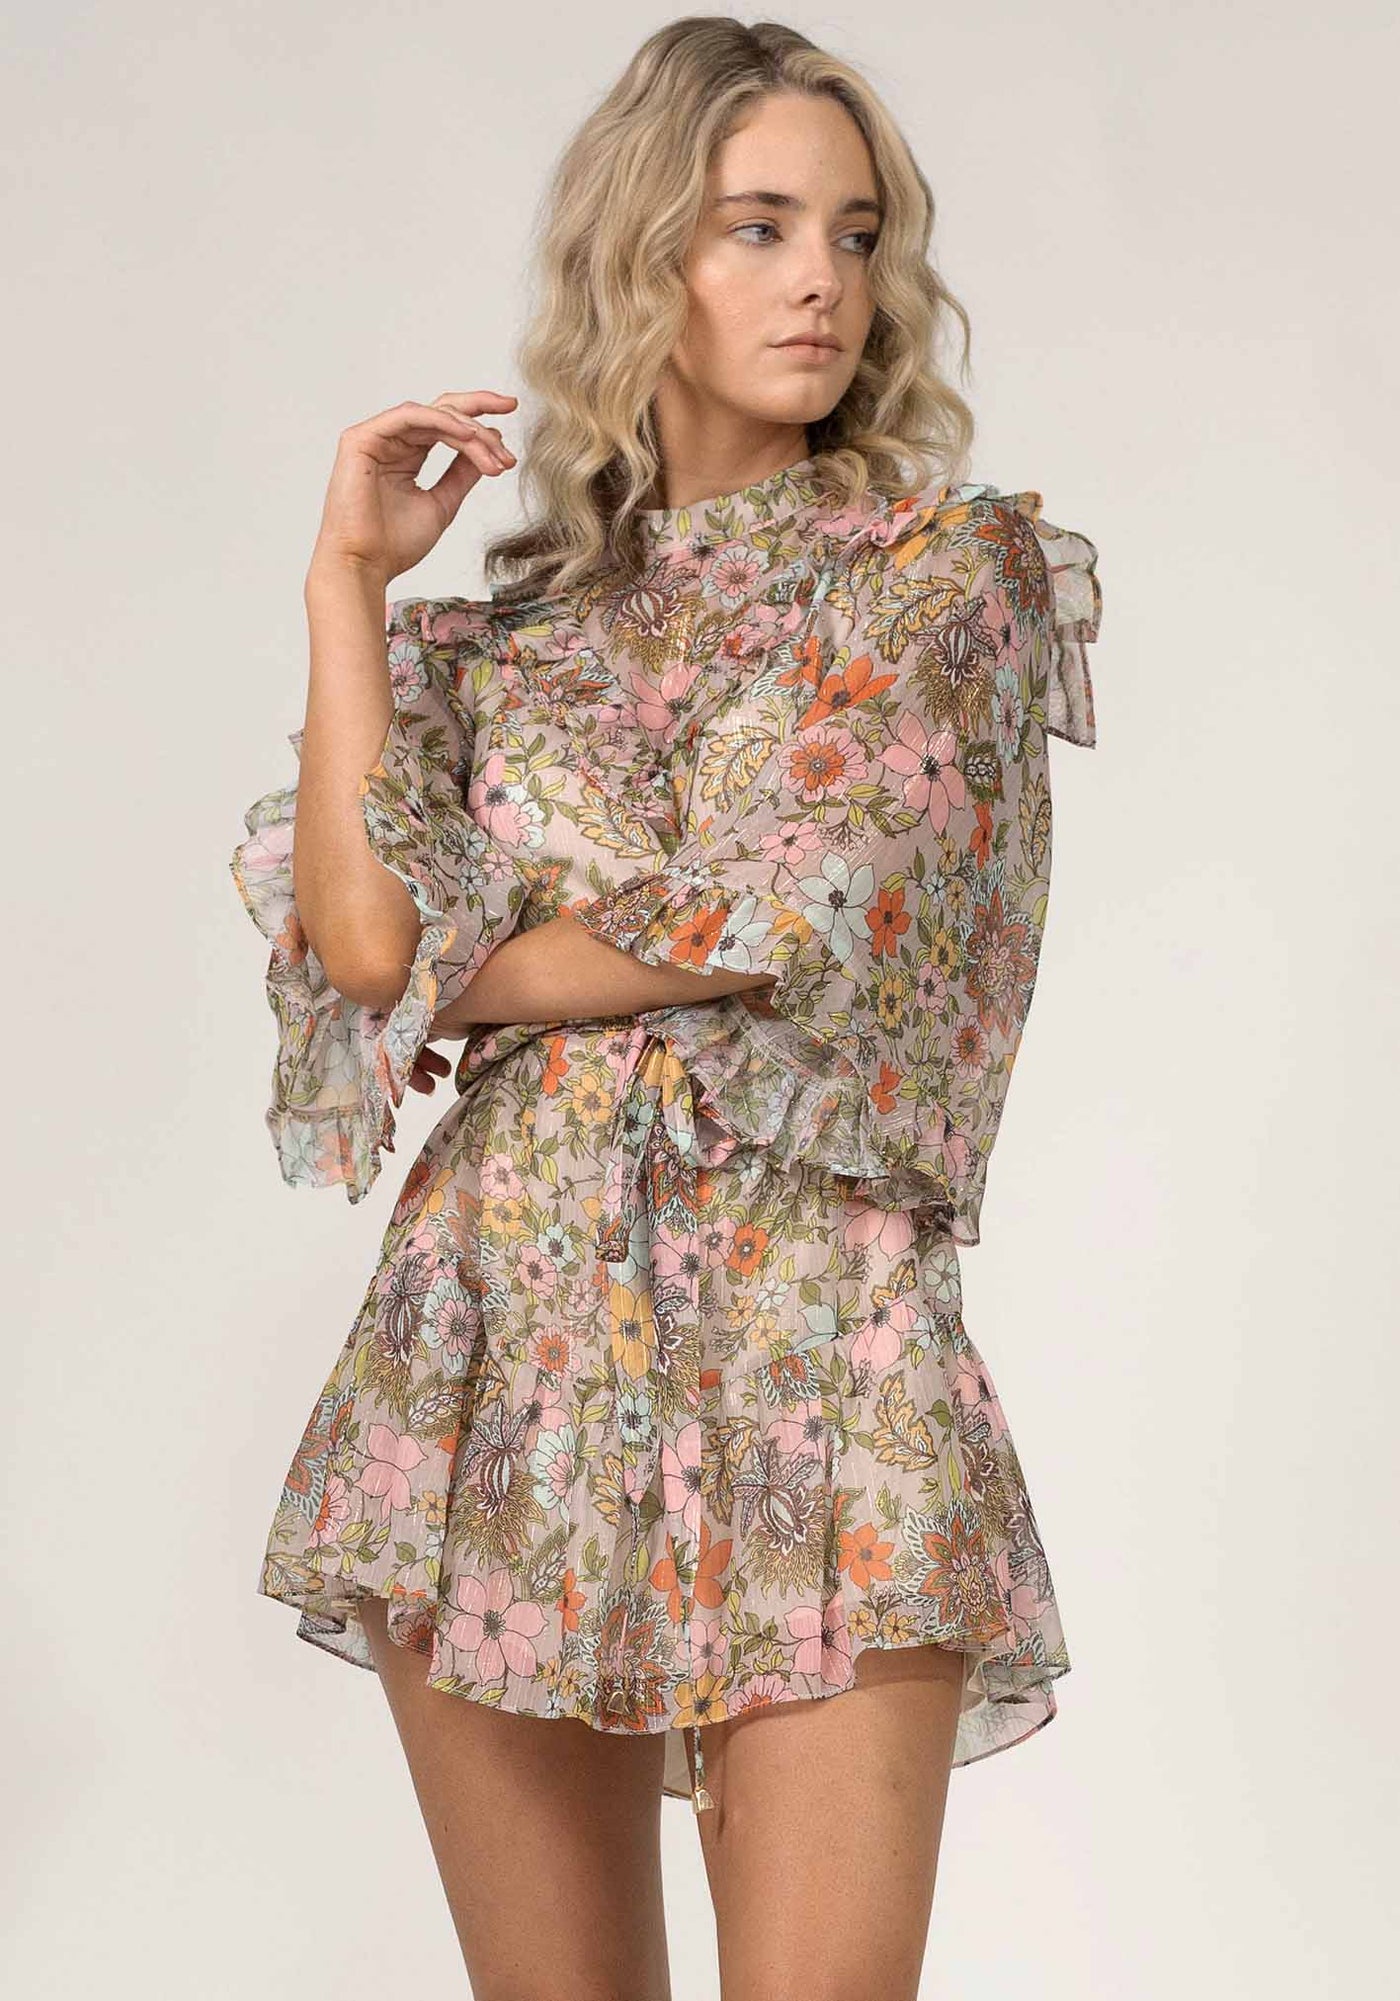 Studio Floral Gold Dust Dress | Floral Party Dress by Three of Something